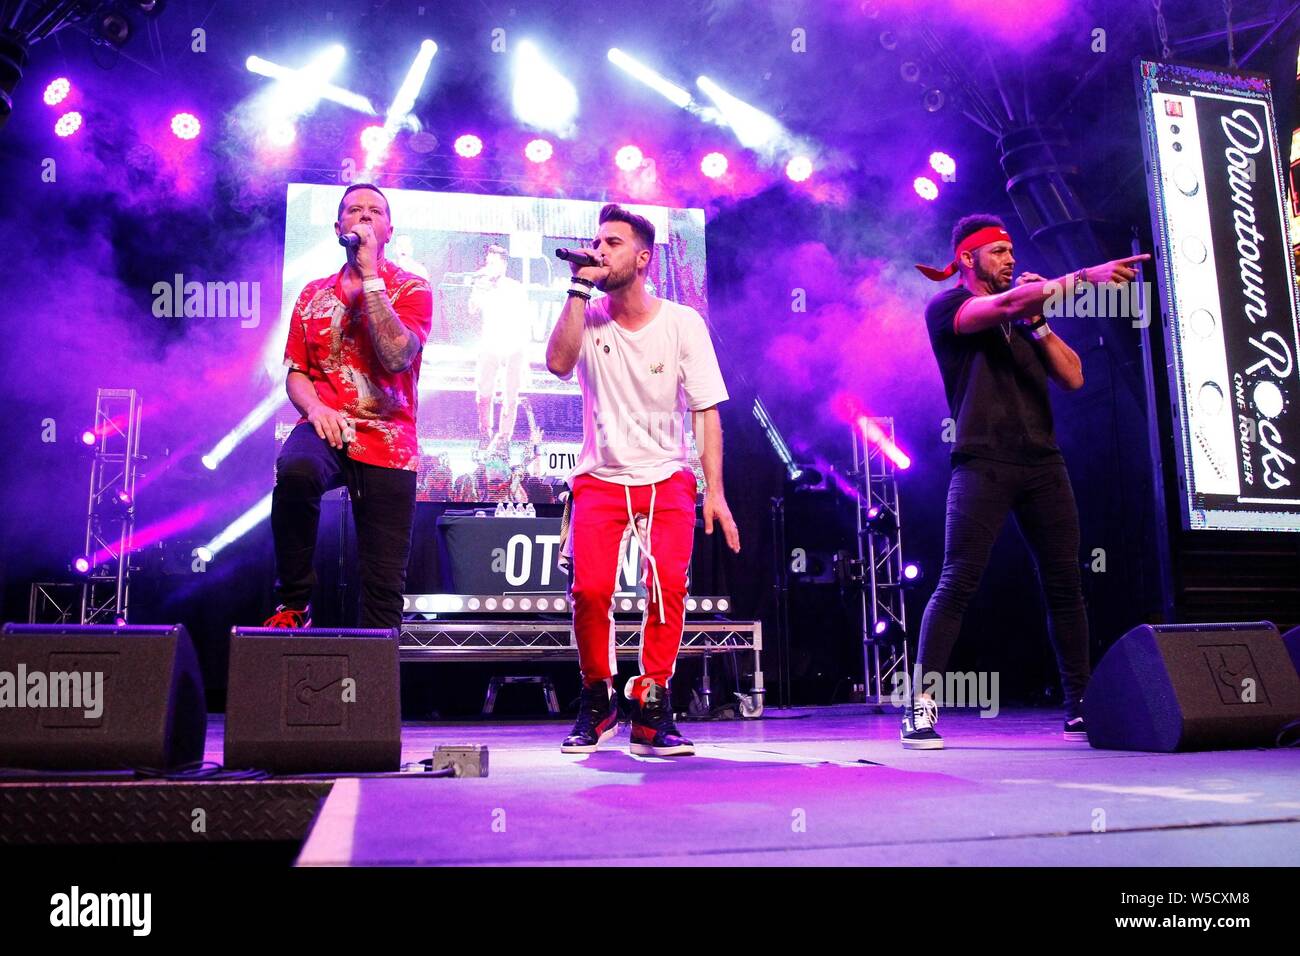 Las Vegas, USA. 27th July, 2019. Las Vegas, NV, USA. 27th July, 2019. Jacob  Underwood, Dan Miller, Trevor Penick of O-Town on stage for Pop 2000 Tour  Concert, Fremont Street Experience, Las